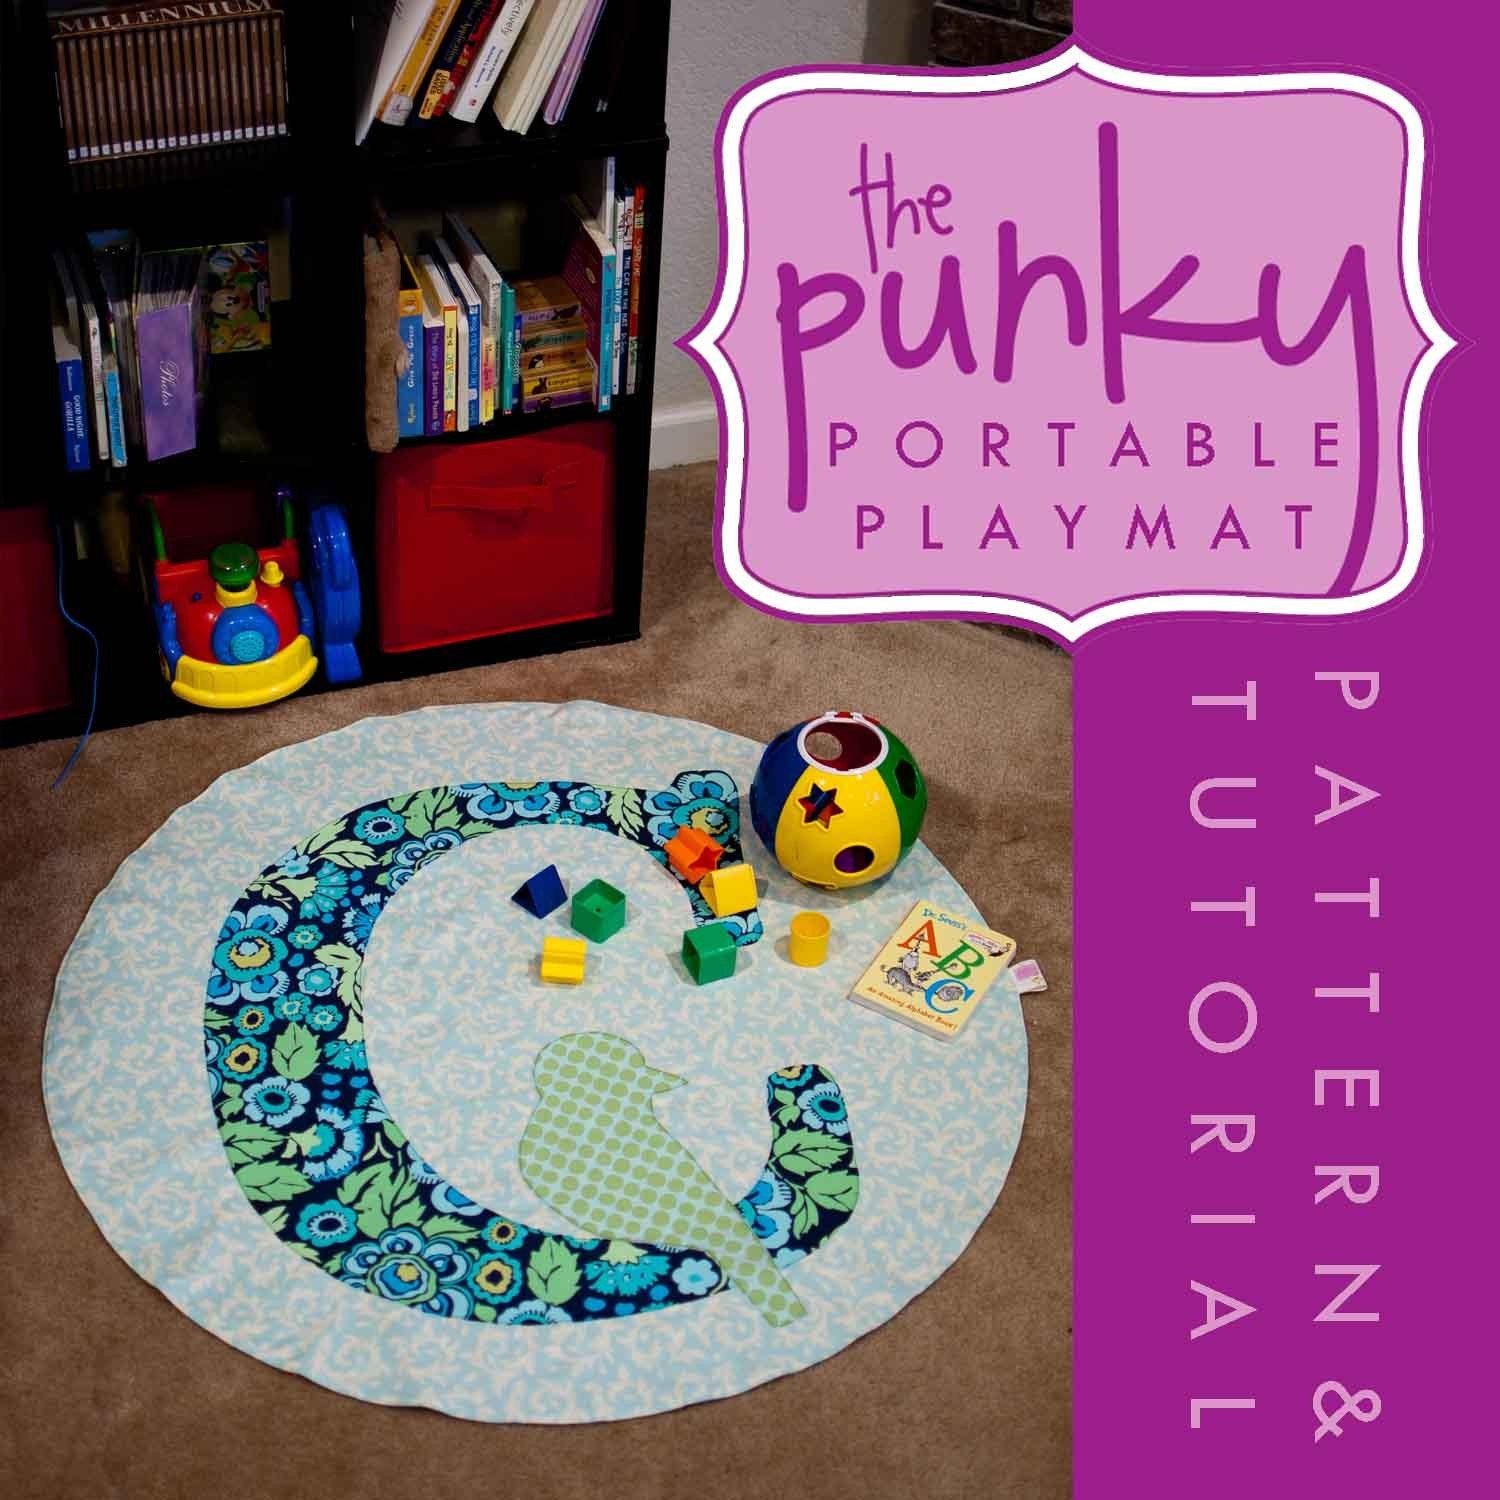 Bird on a Letter- Pattern and Tutorial PDF Punky Portable Play Mat, Stroller Blanket, Rug, Throw, Sewing, Easy, Activity, Toy, Colorful, High Contrast, DIY, Custom, Personalized, Monogram